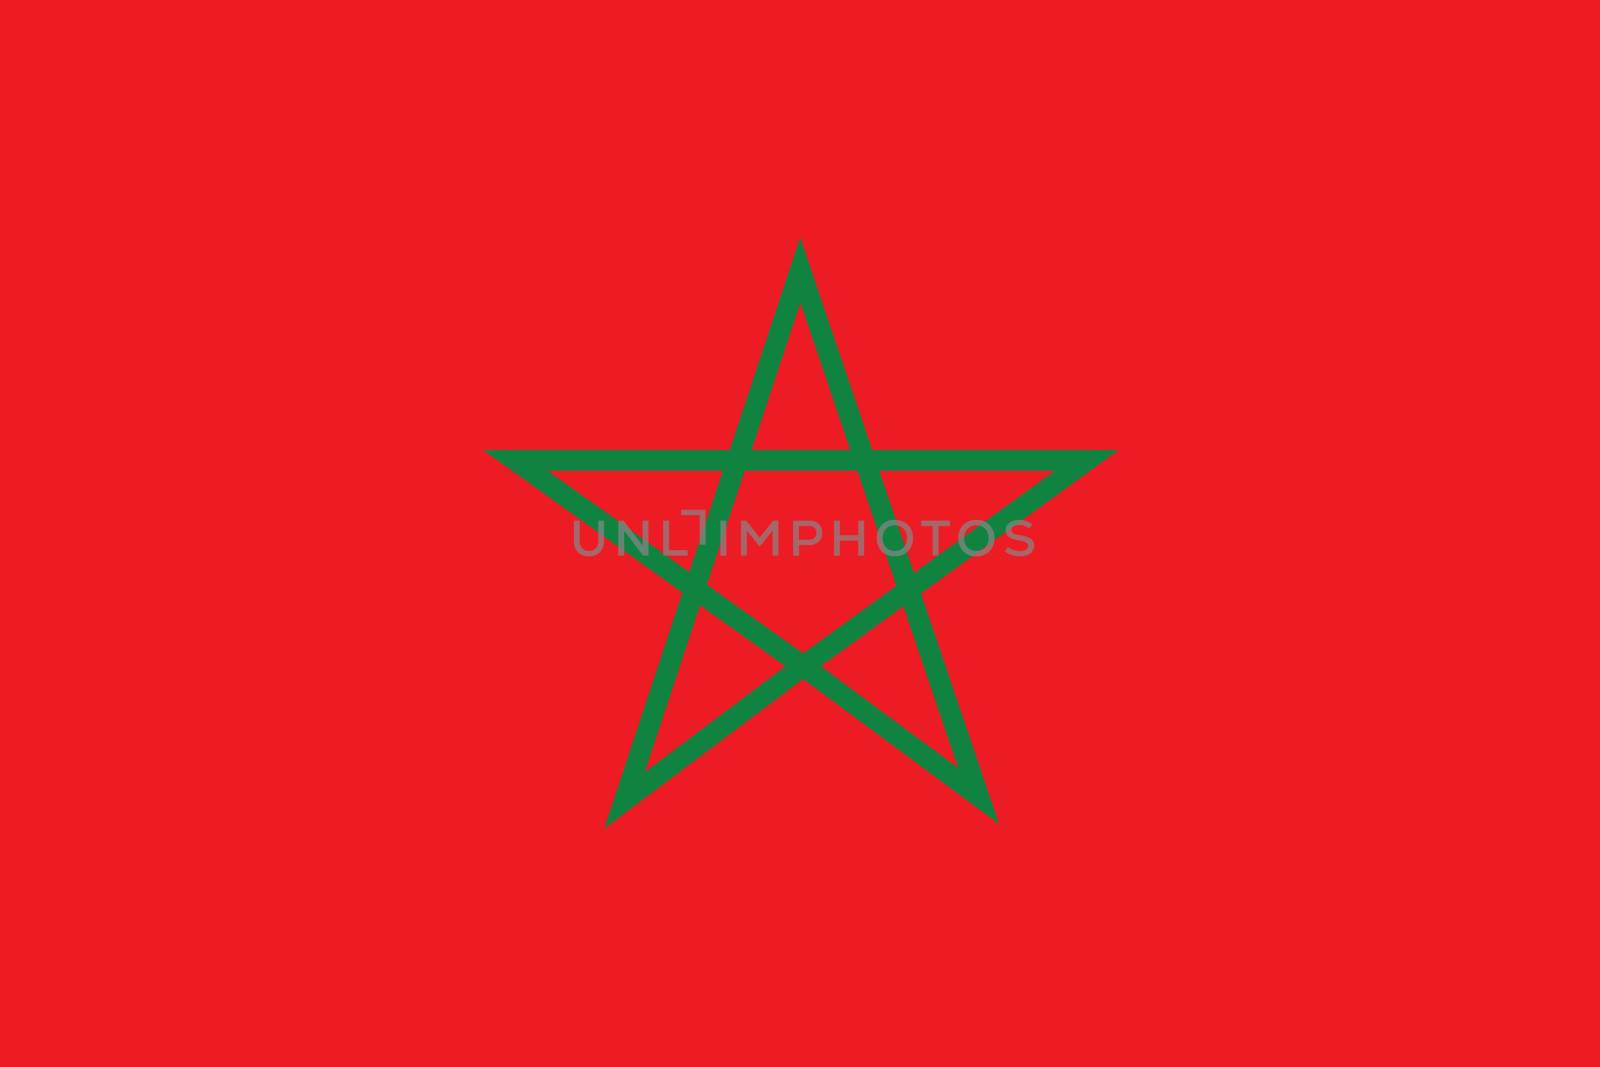 An Illustrated Drawing of the flag of Morocco